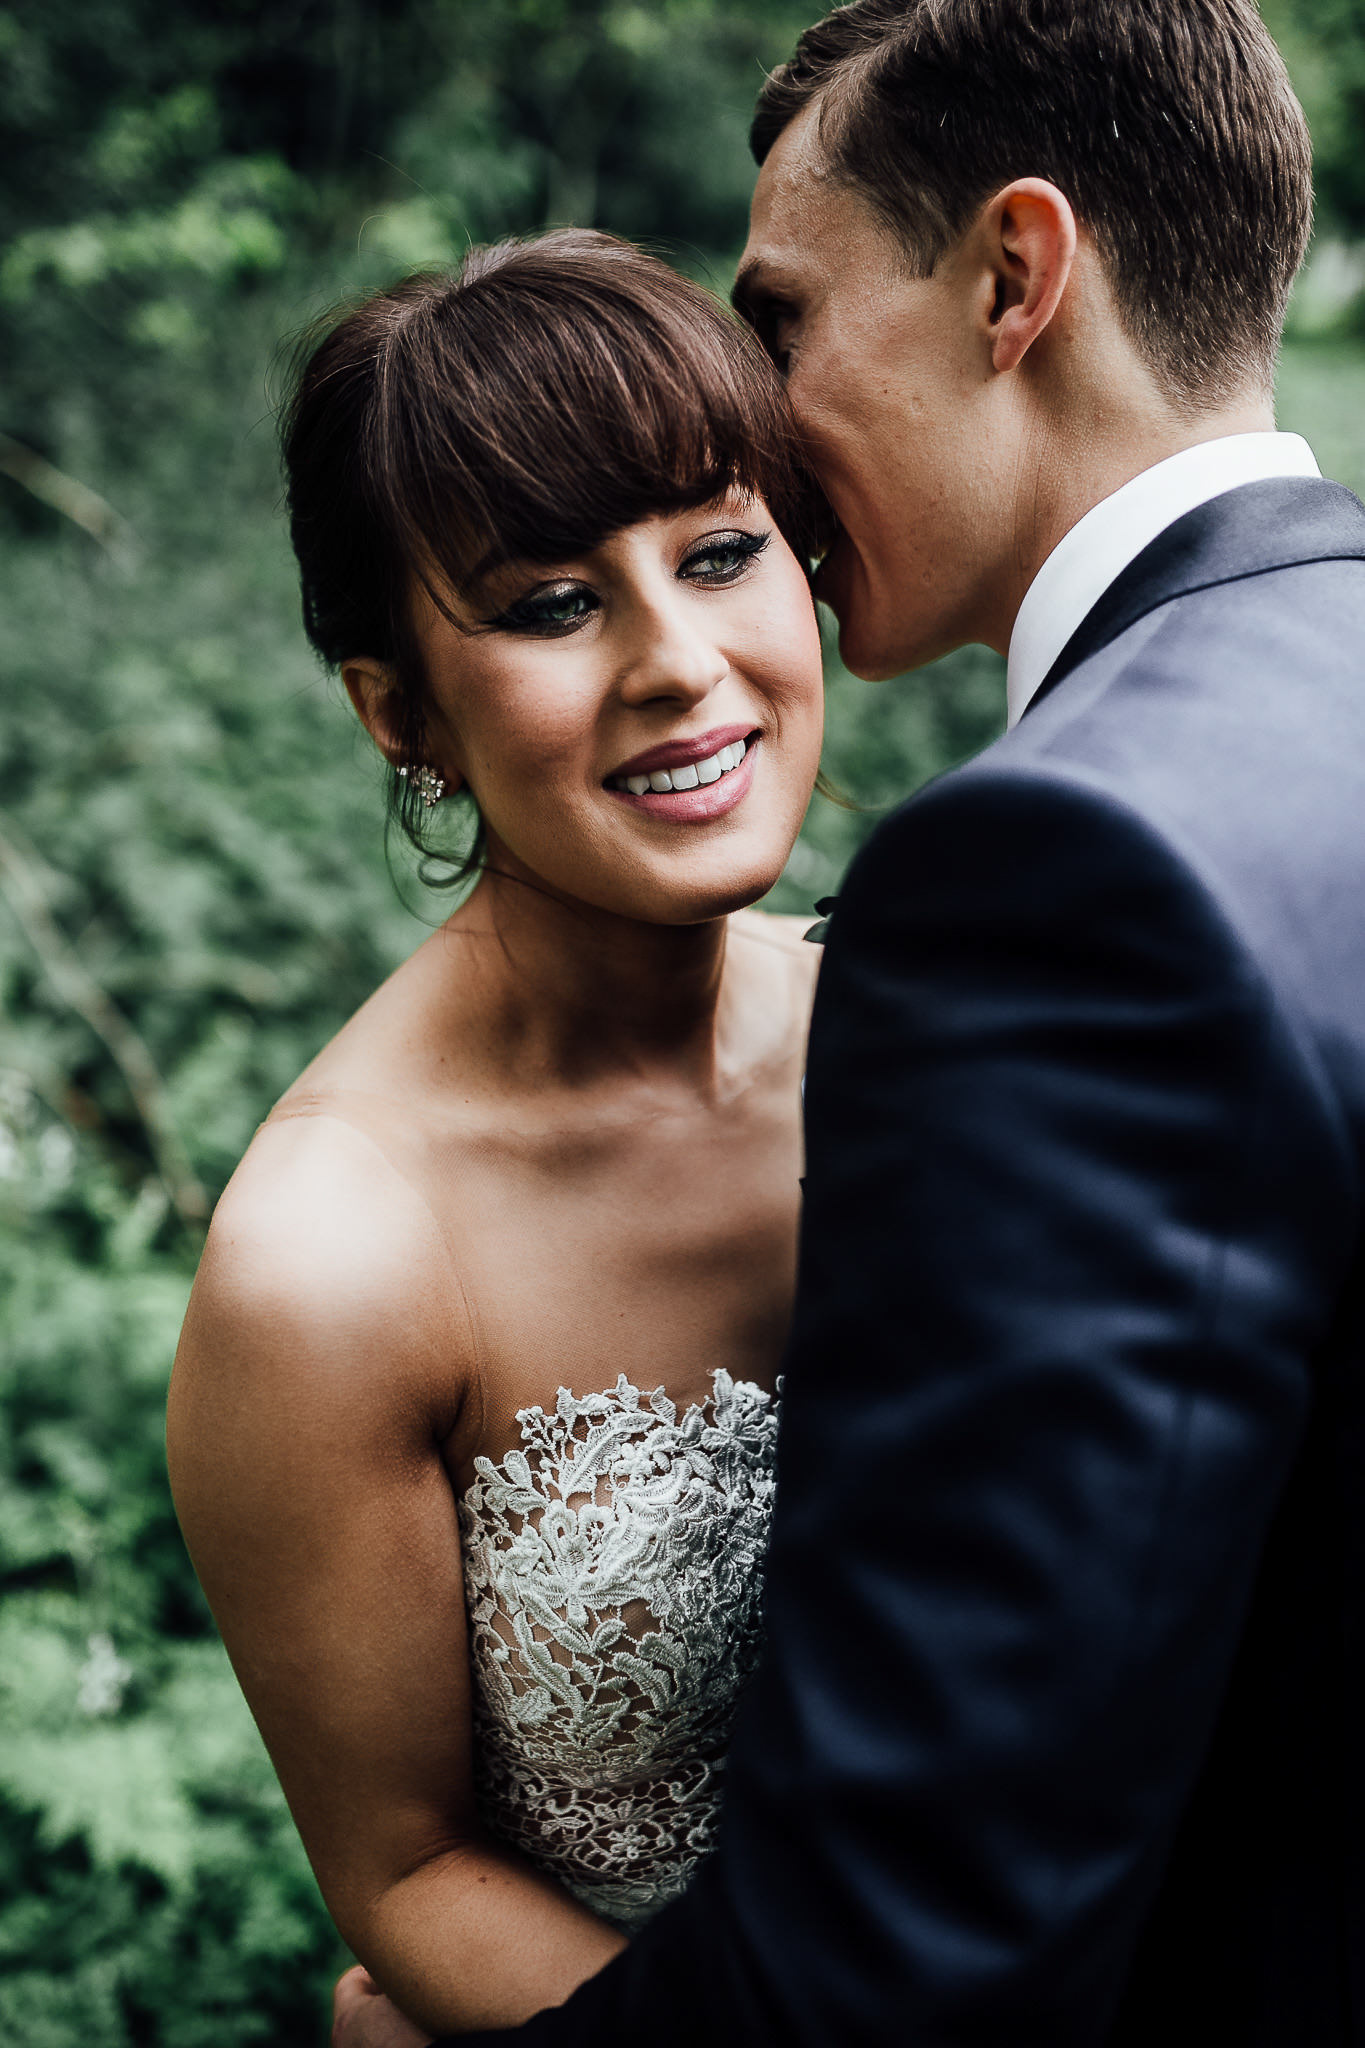 couples portraits from wedding at morden hall london